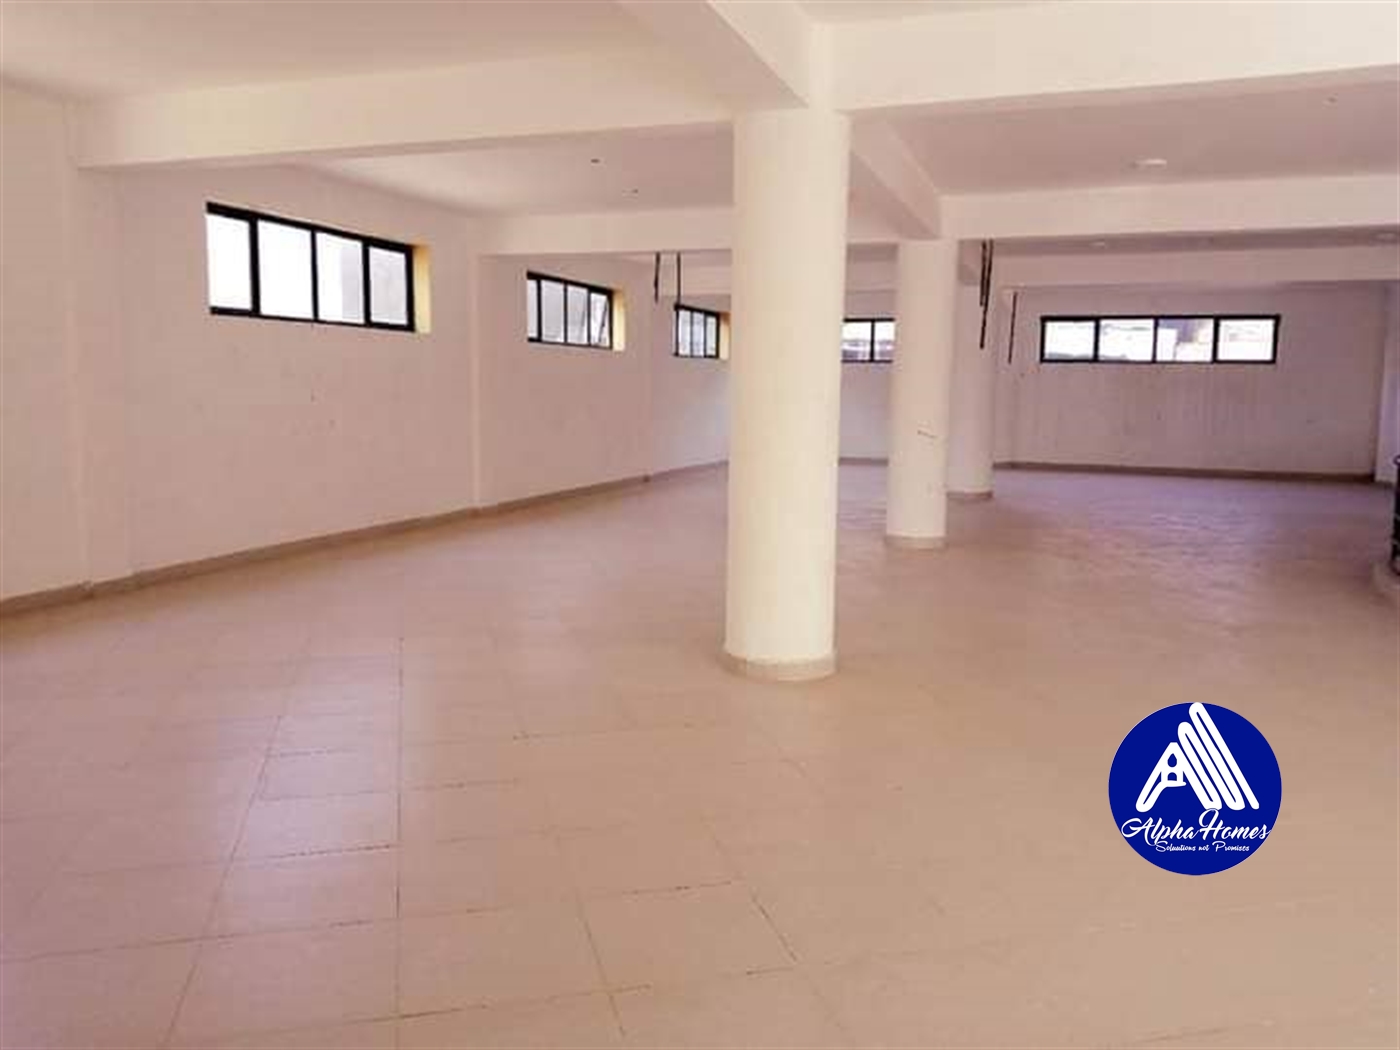 Office Space for rent in Kakyeka Mbarara